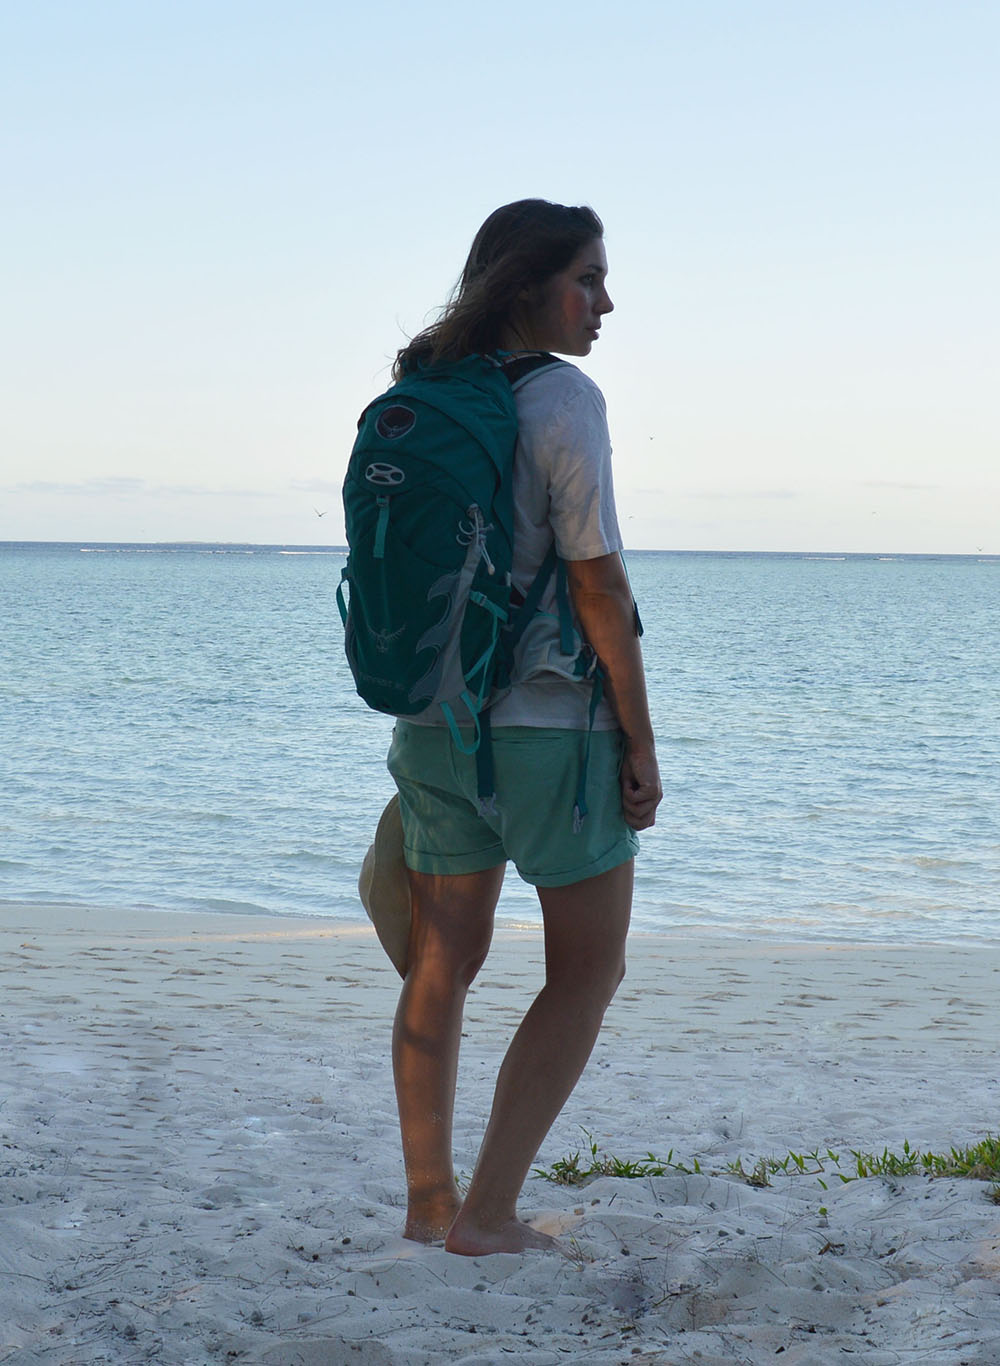 Osprey Tempest Talon review | Osprey 20 litre backpack rucksack review The Girl Outdoors